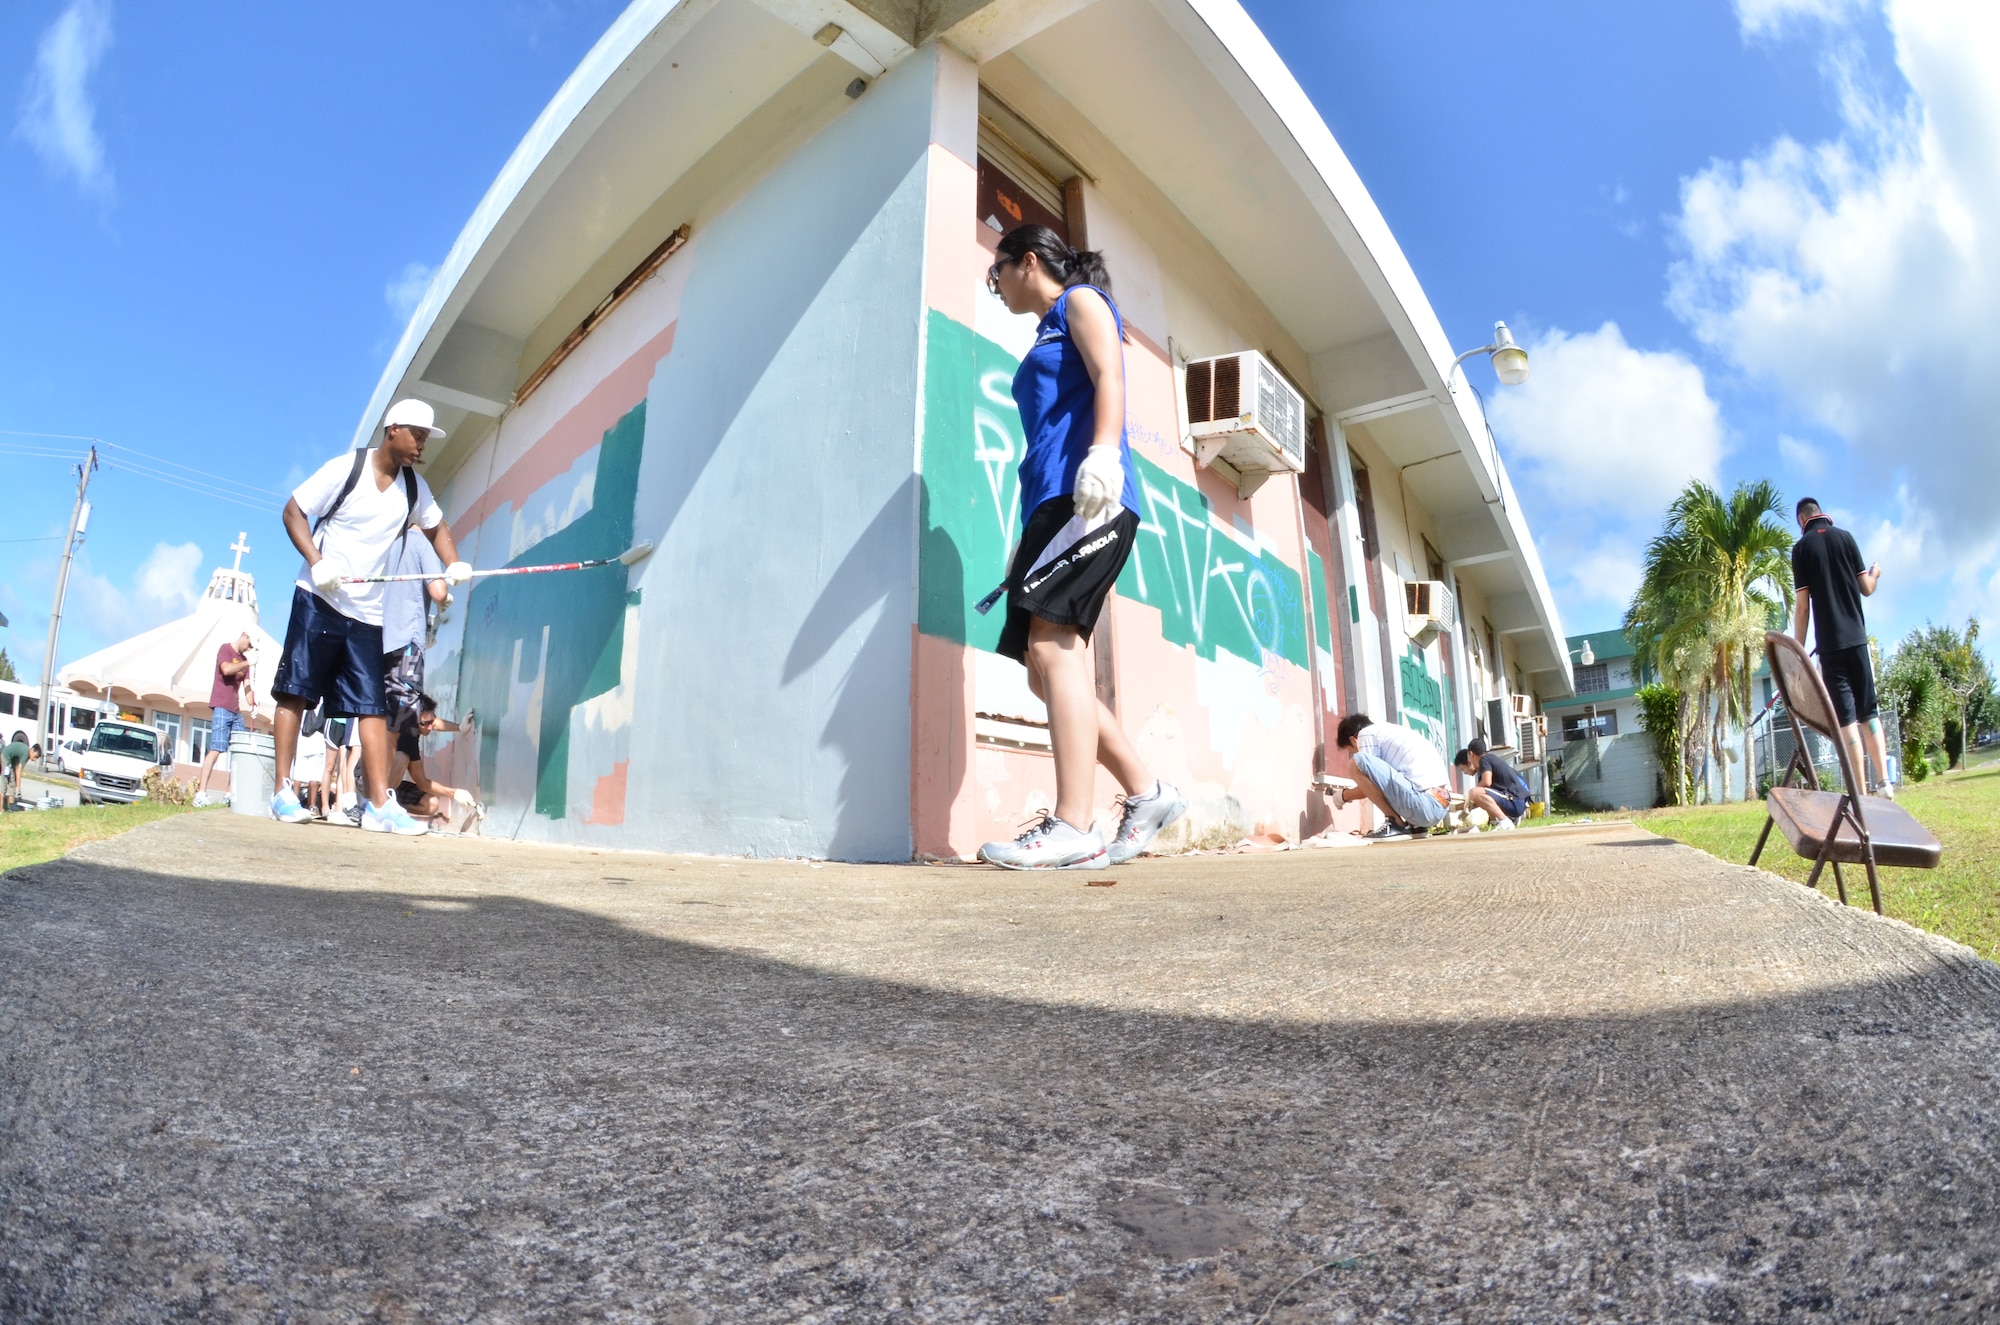 ANDERSEN AIR FORCE BASE, Guam - Members of Team Andersen along with membersfrom the Japan Air Self Defense Force and the Royal Australian Air Force
participate in a community beautification project in Dededo, Guam, Feb. 18.
(U.S. Air Force photo by Staff Sgt. Alexandre Montes) 
